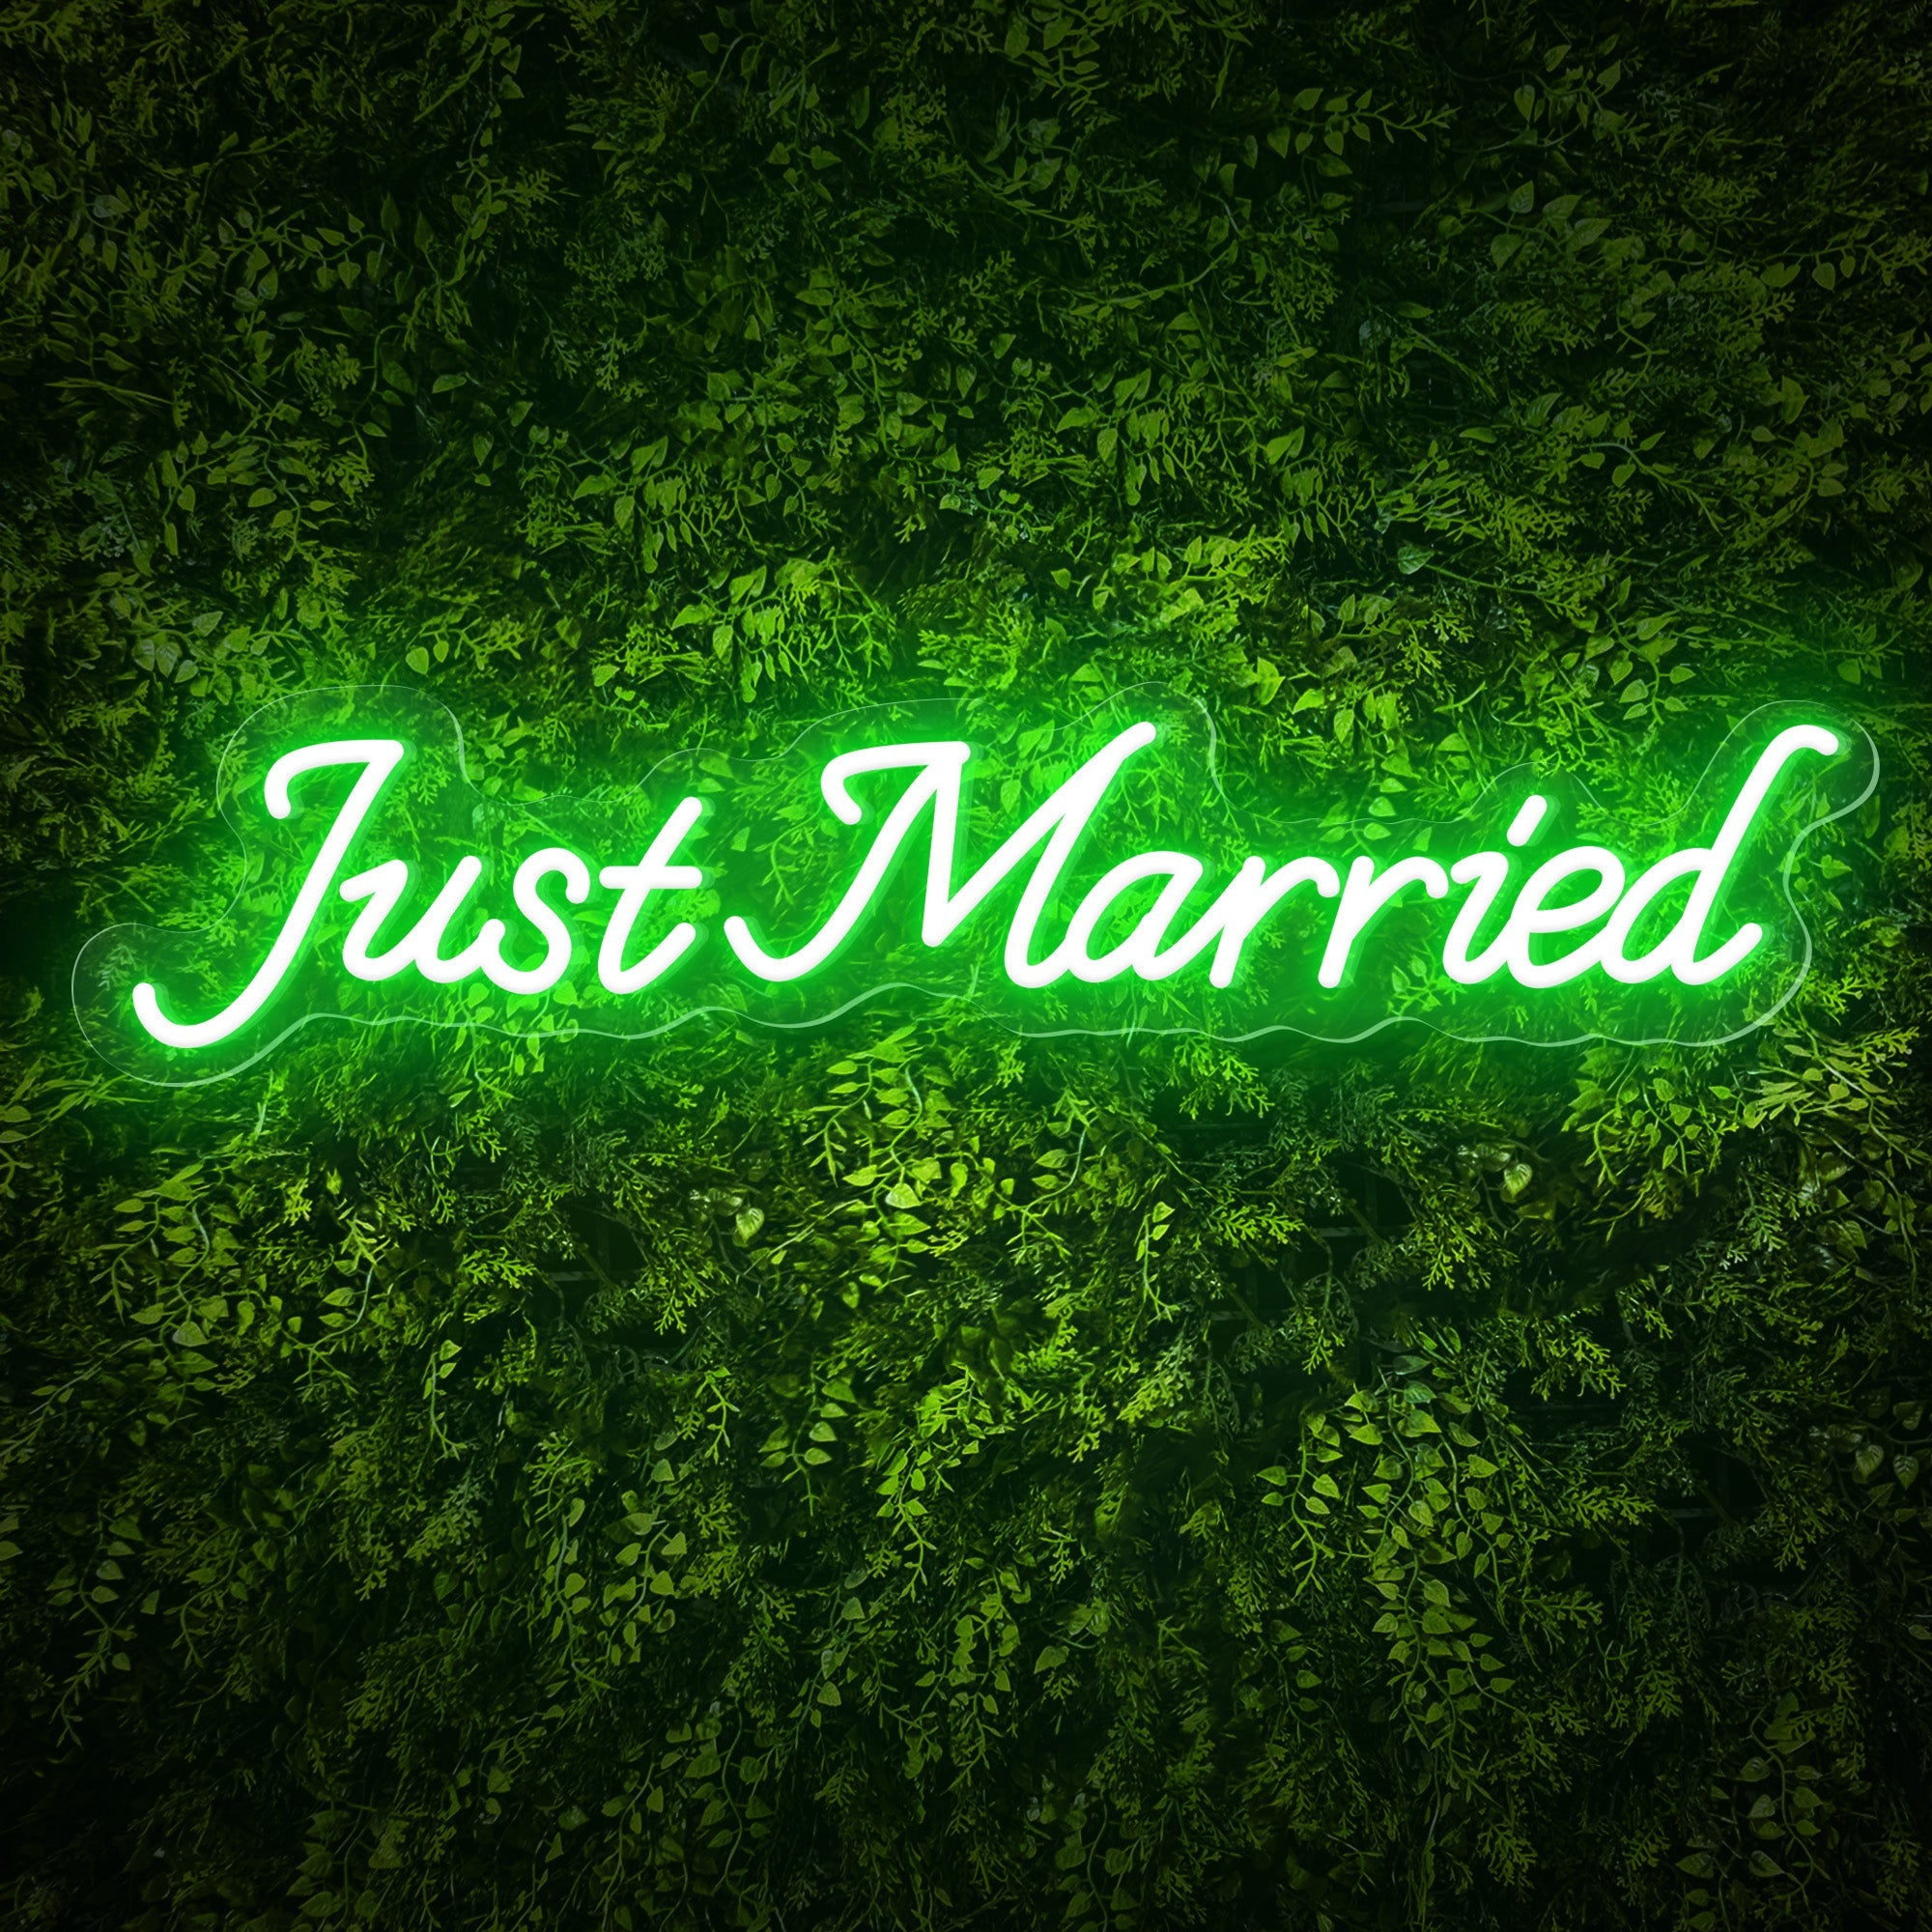 "Just Married" Words Neon Sign